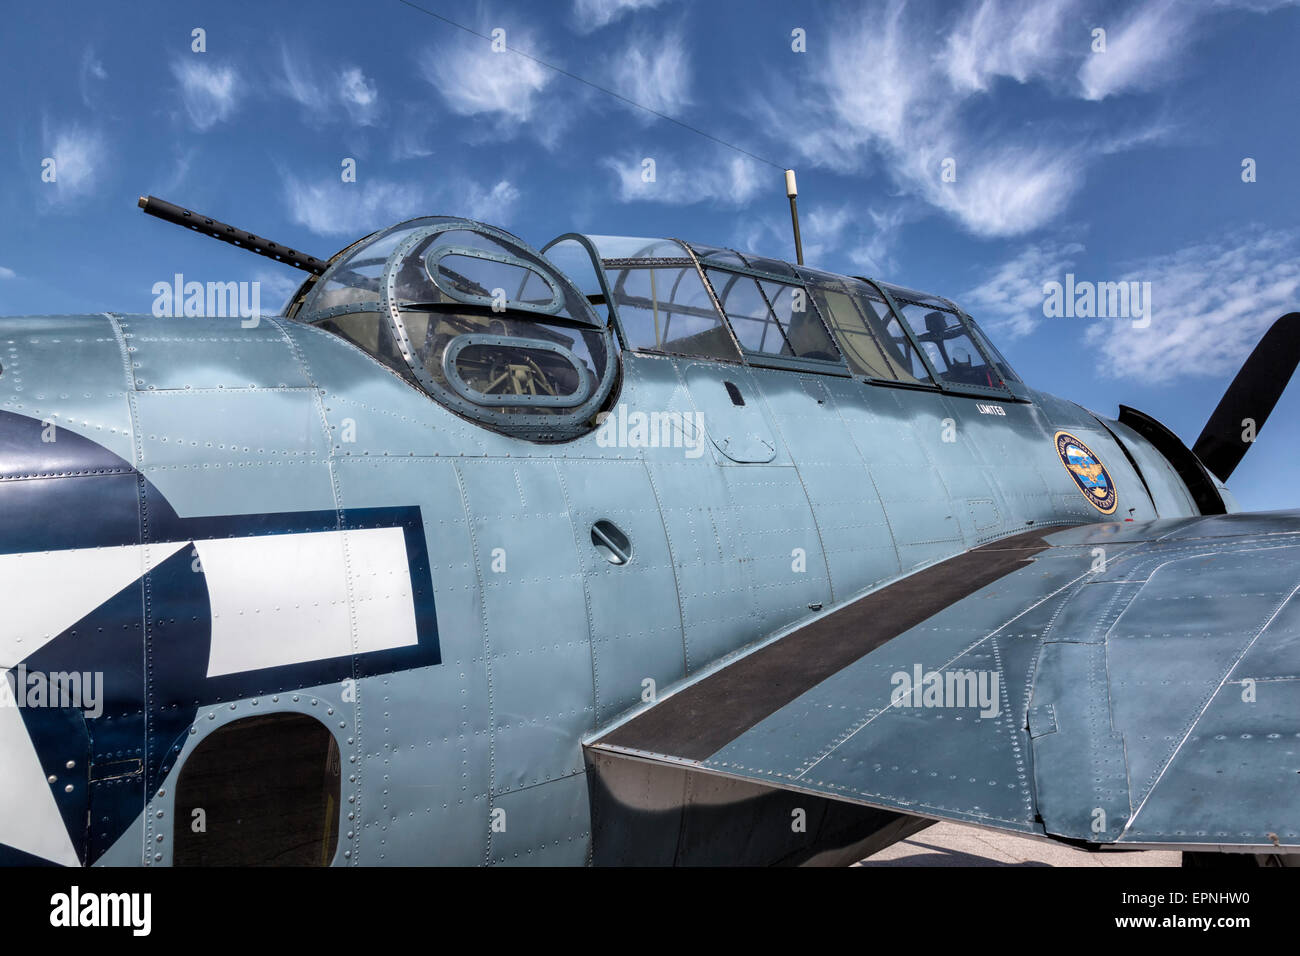 Grumman TBM Avenger carrier aircraft of the US Navy with wings folded Stock Photo